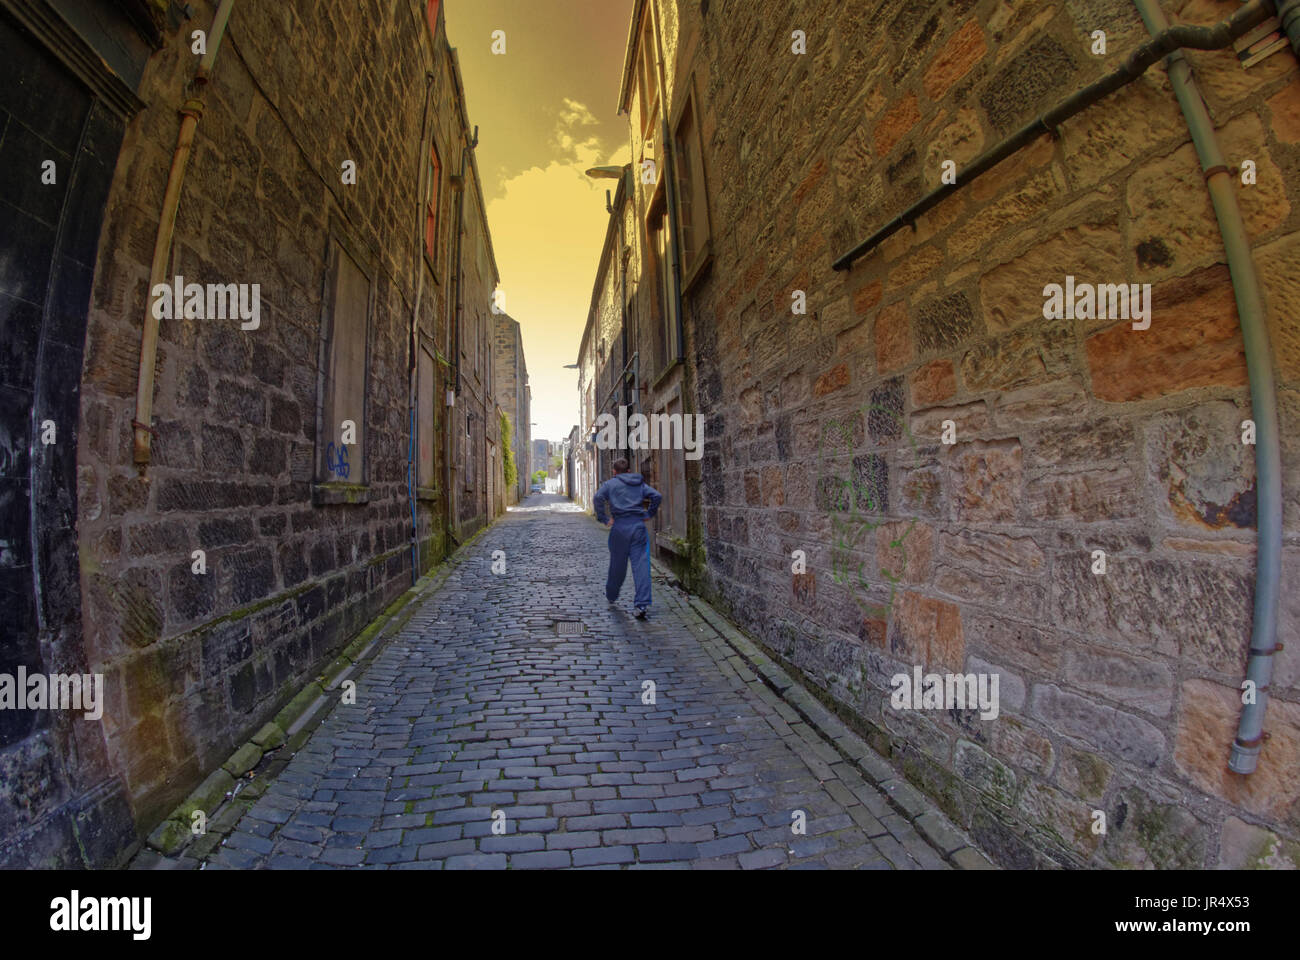 young boy running down alley way in perspective Stock Photo